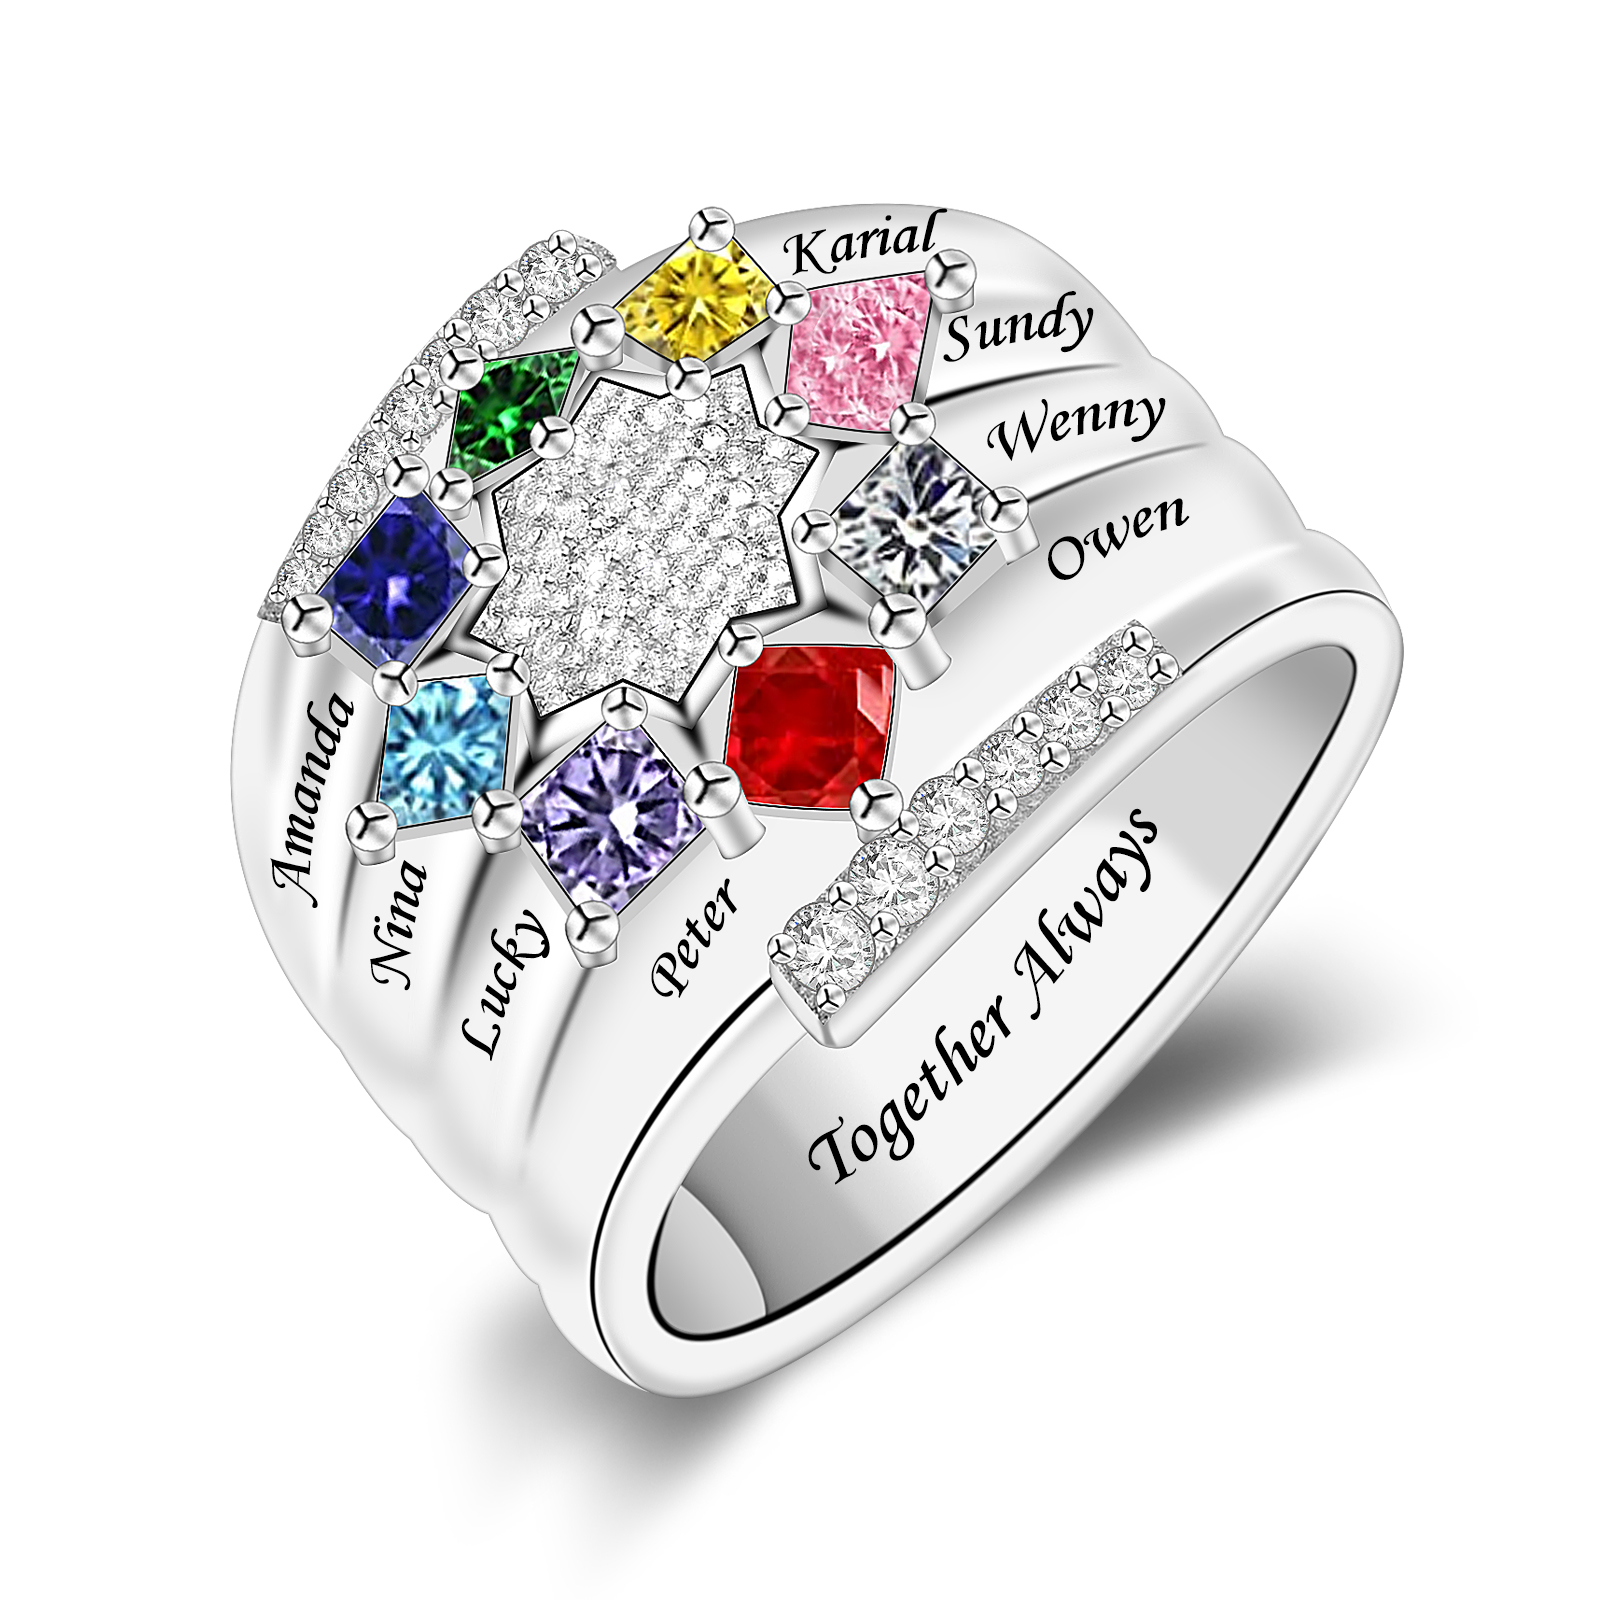 R5-1-8 Personalized Mothers Ring Birthstone and Engraved Name (1-9 Stones)